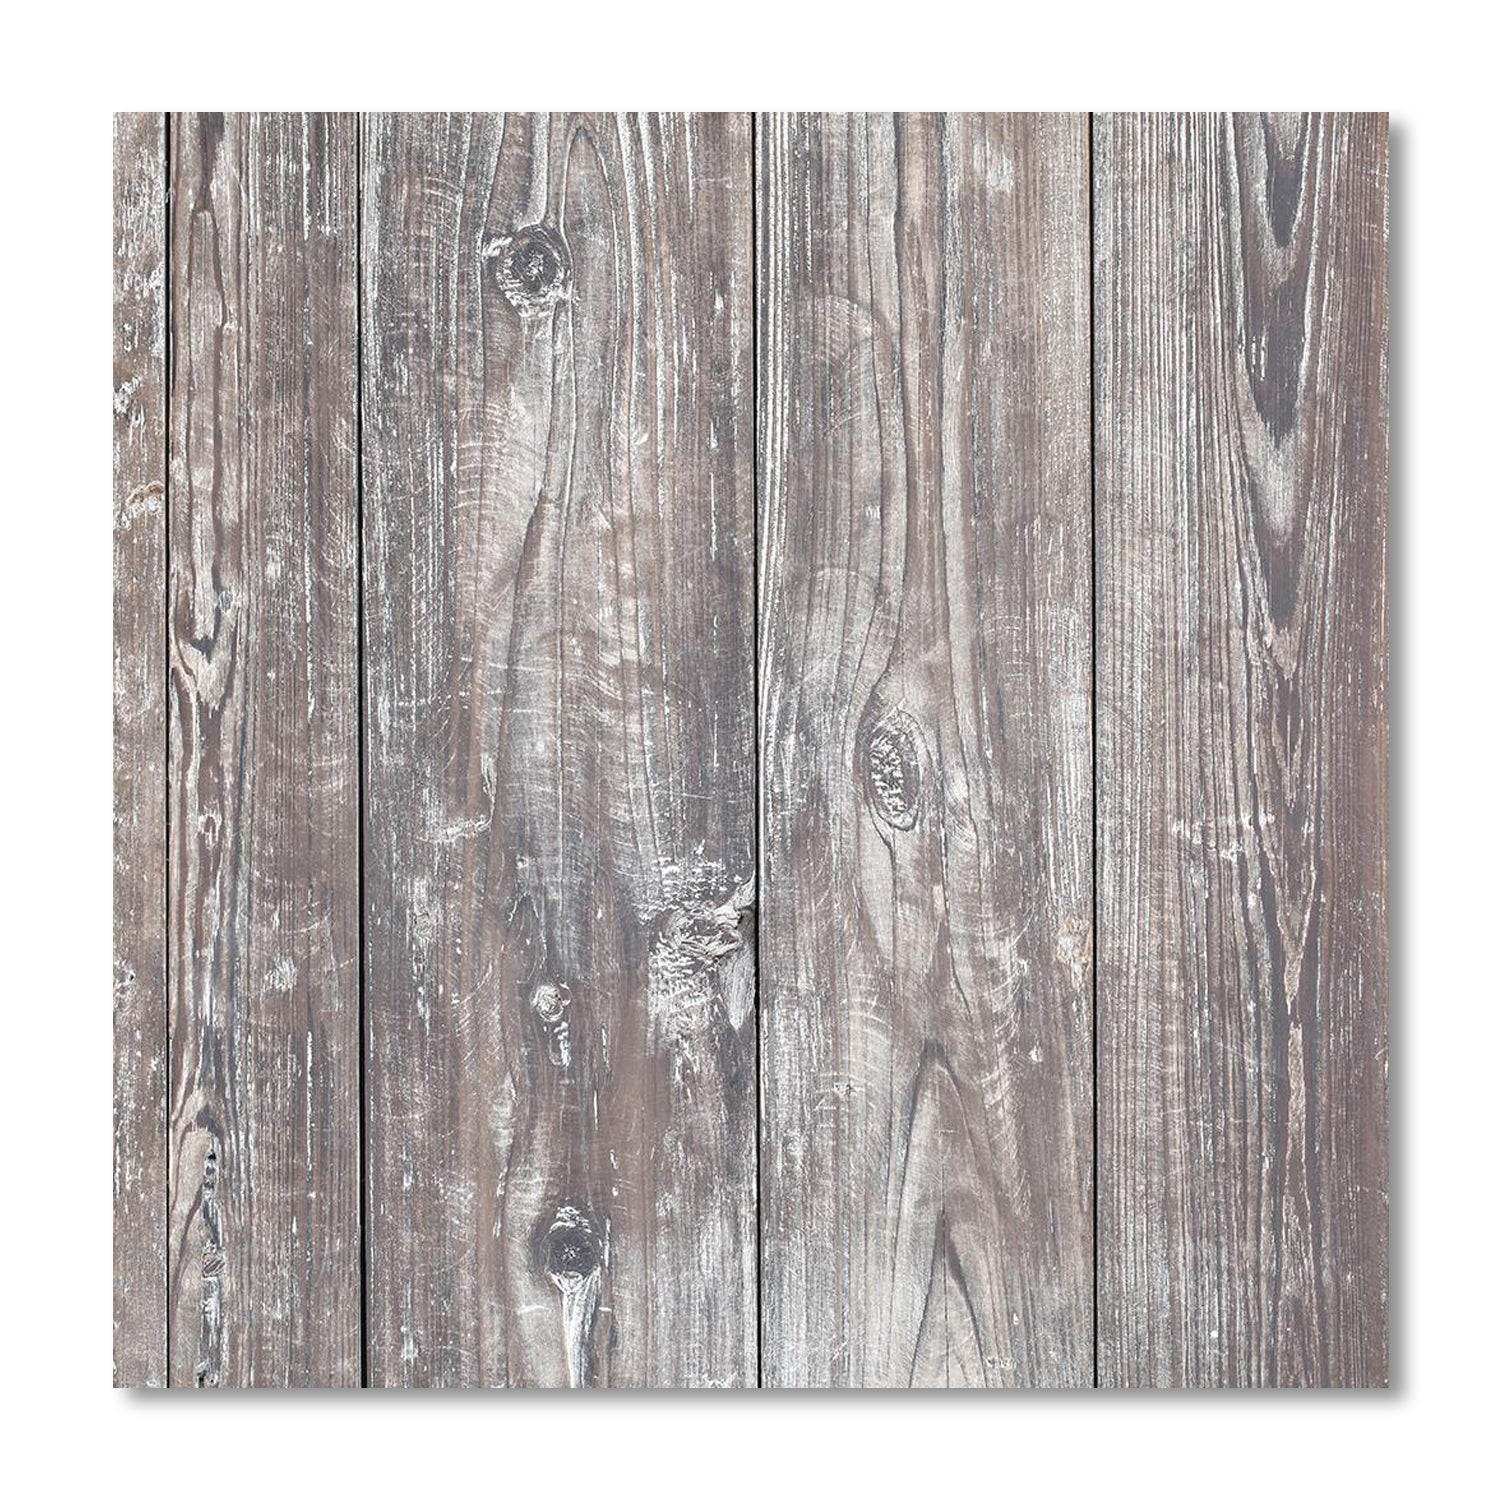 Photo Boards® Wood Effect Photography Backdrop